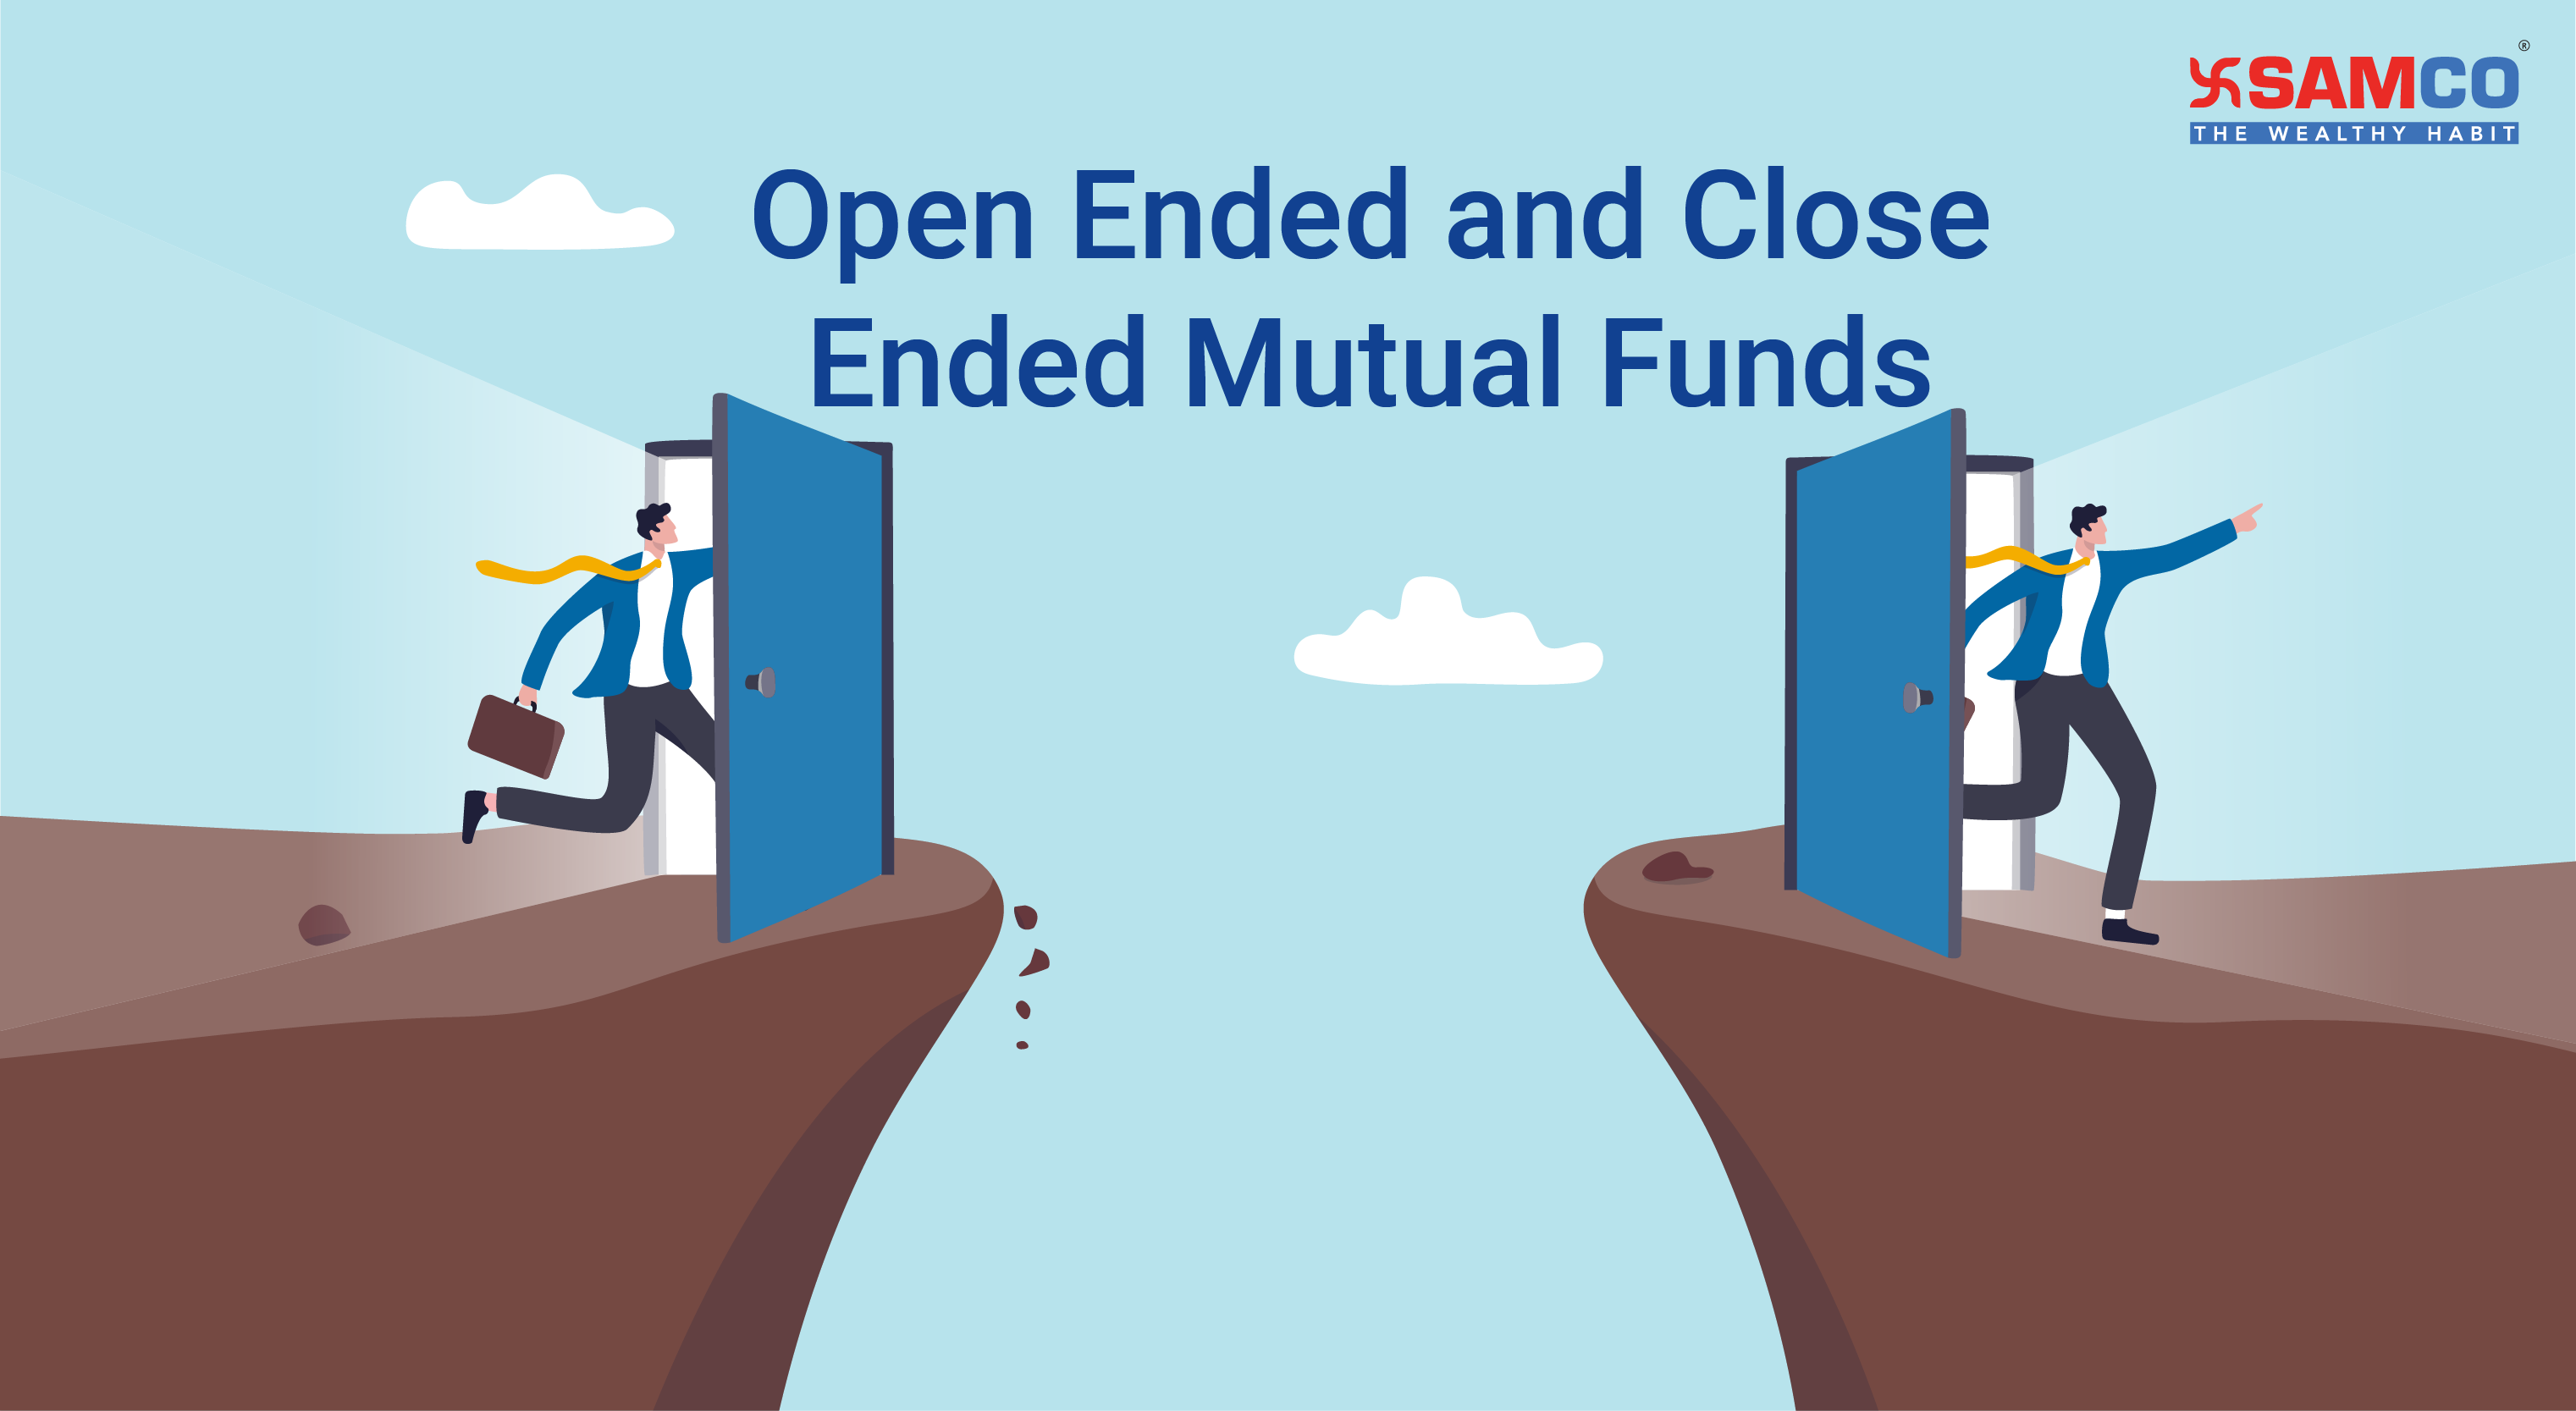 Open Ended and Close Ended Mutual Funds